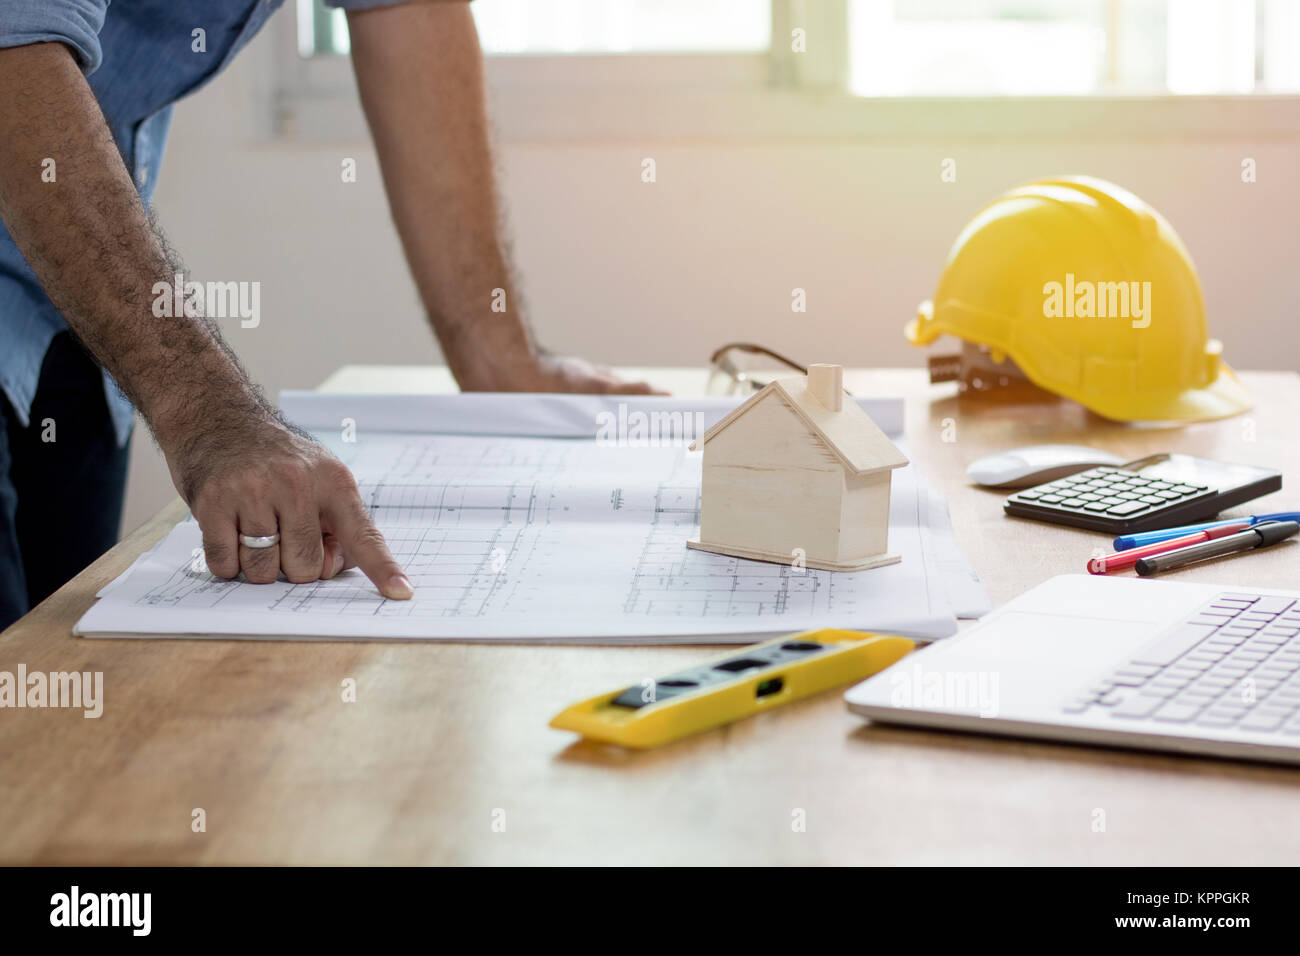 Enginee or architect  ponting and looking on plan paper on desk, architect and working concept Stock Photo